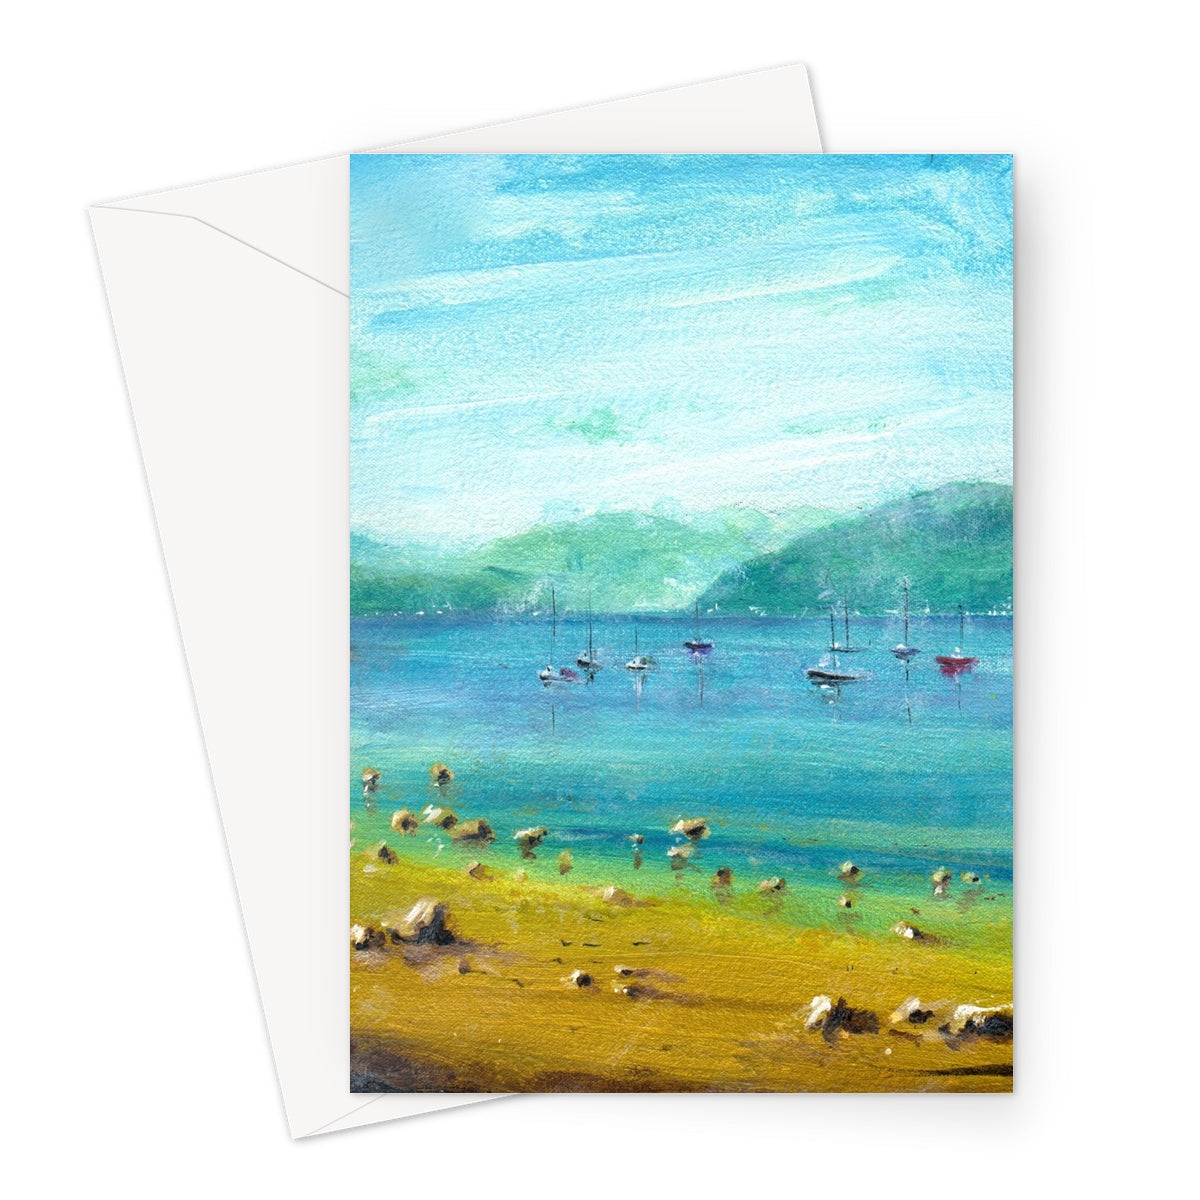 A Clyde Summer Day Art Gifts Greeting Card-Stationery-River Clyde Art Gallery-A5 Portrait-1 Card-Paintings, Prints, Homeware, Art Gifts From Scotland By Scottish Artist Kevin Hunter